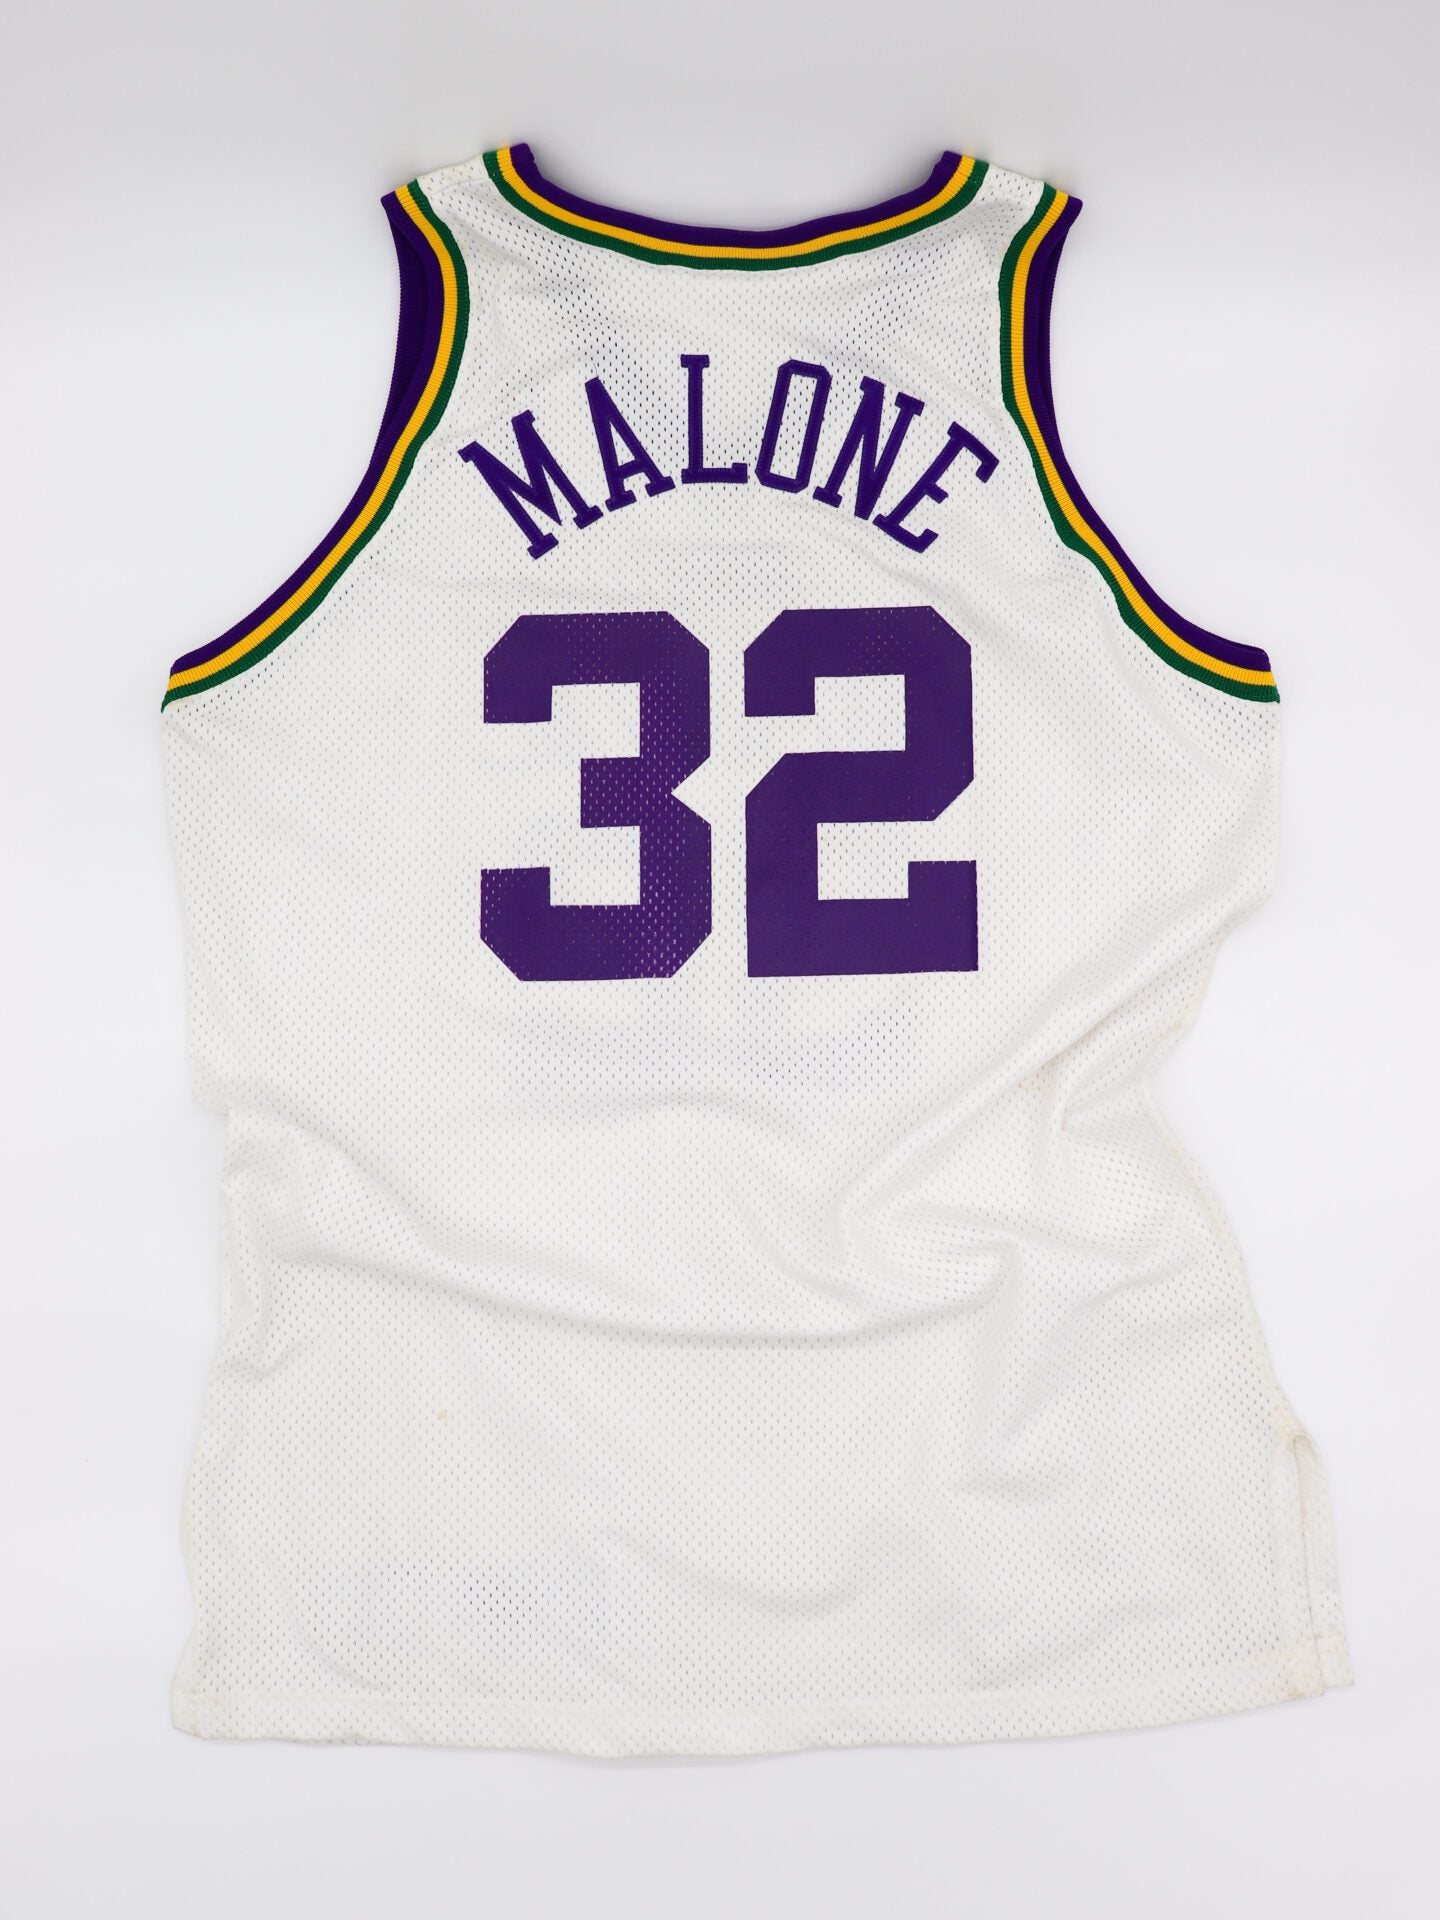 Game Worn & Autographed 1995-96 #32 Karl Malone Home White Utah Jazz Jersey with Certified Tags